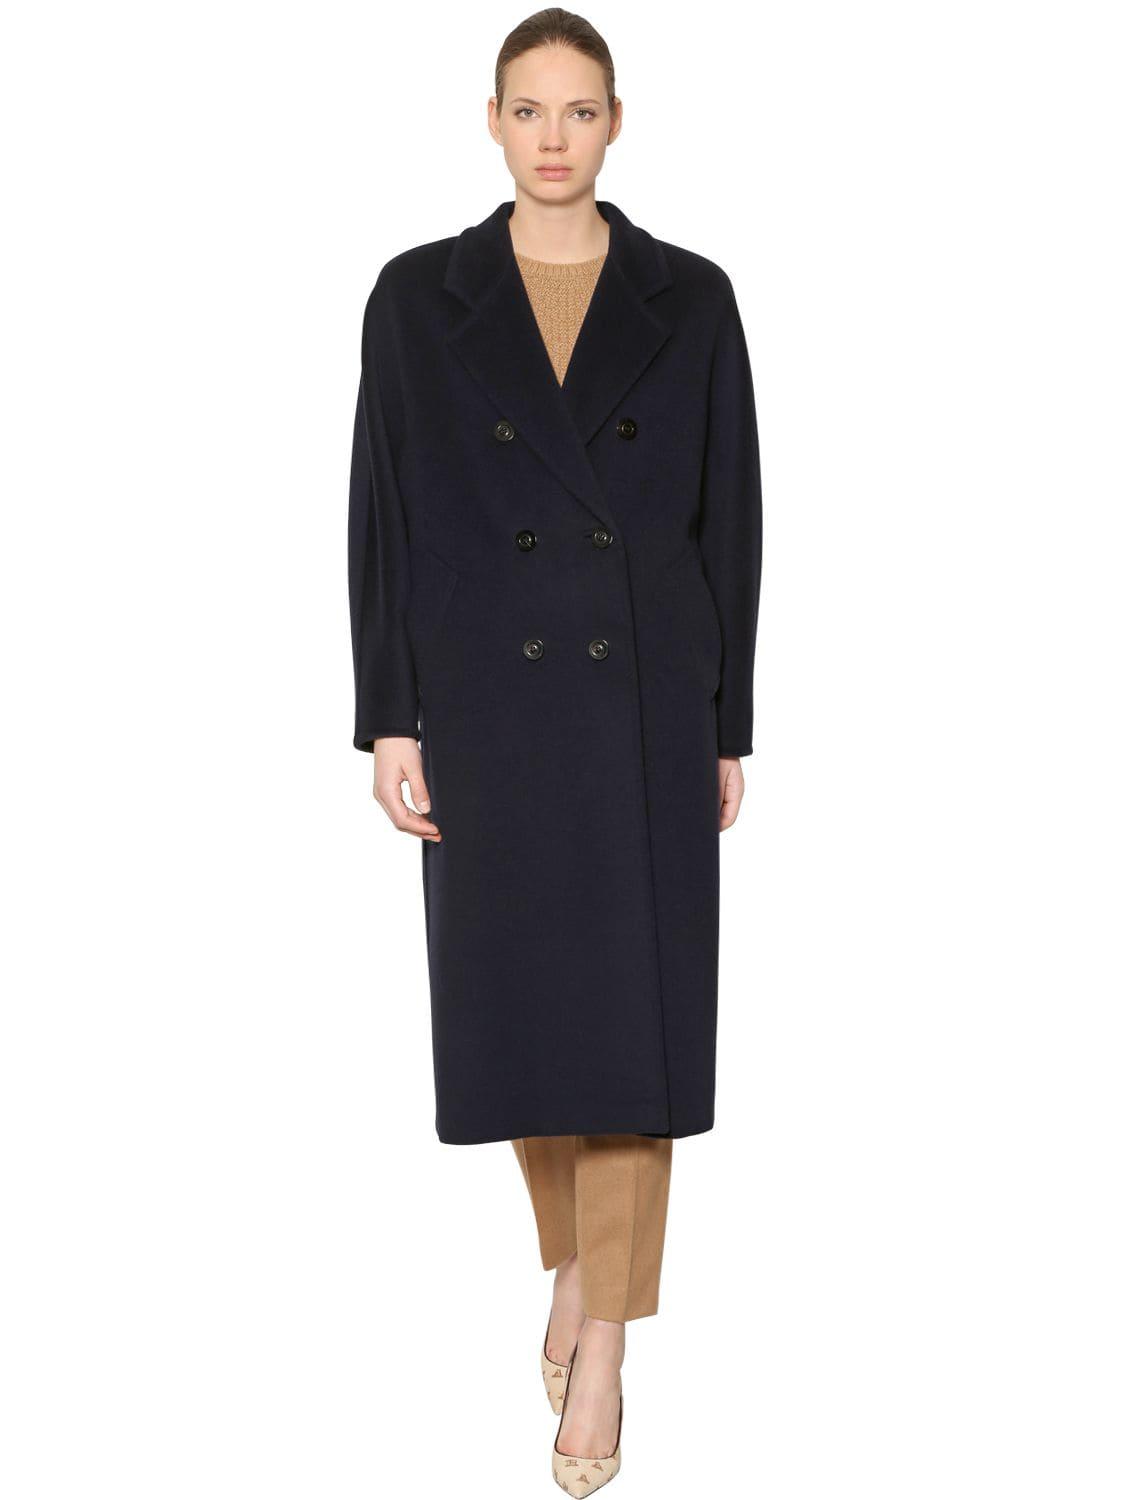 Max Mara Madame Double Breasted Wool Long Coat in Black - Lyst